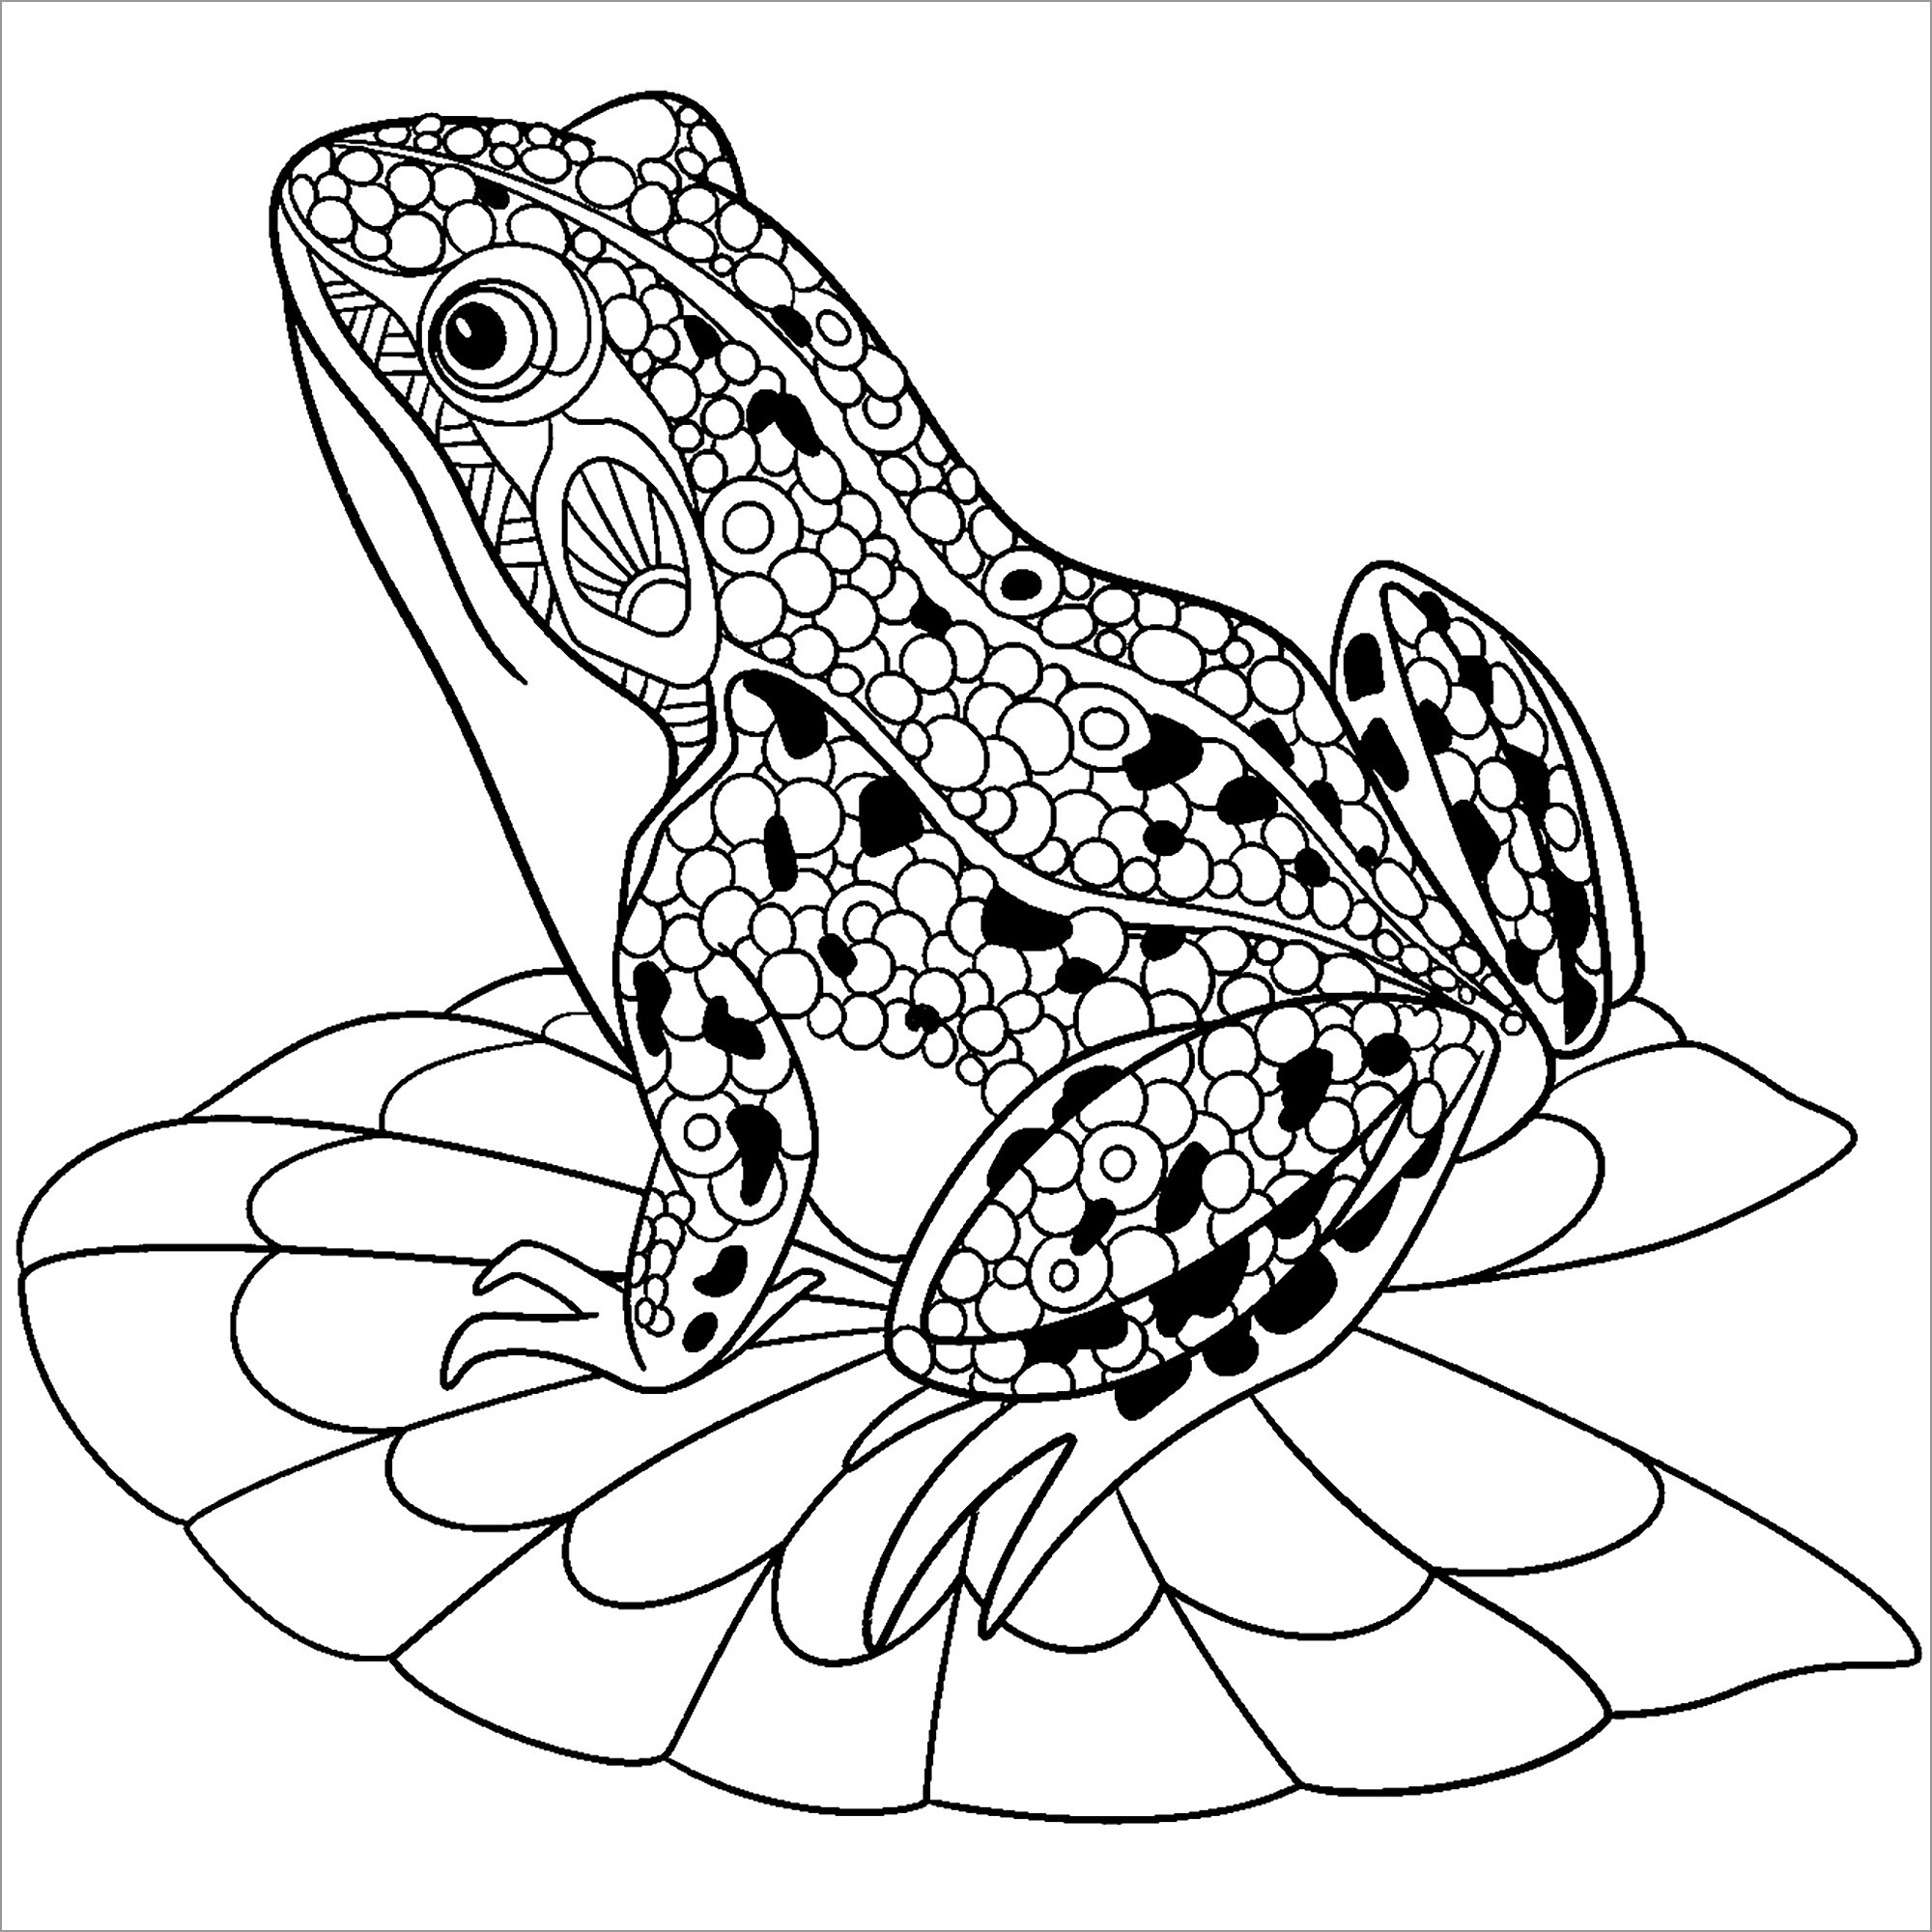 Toads Coloring Pages